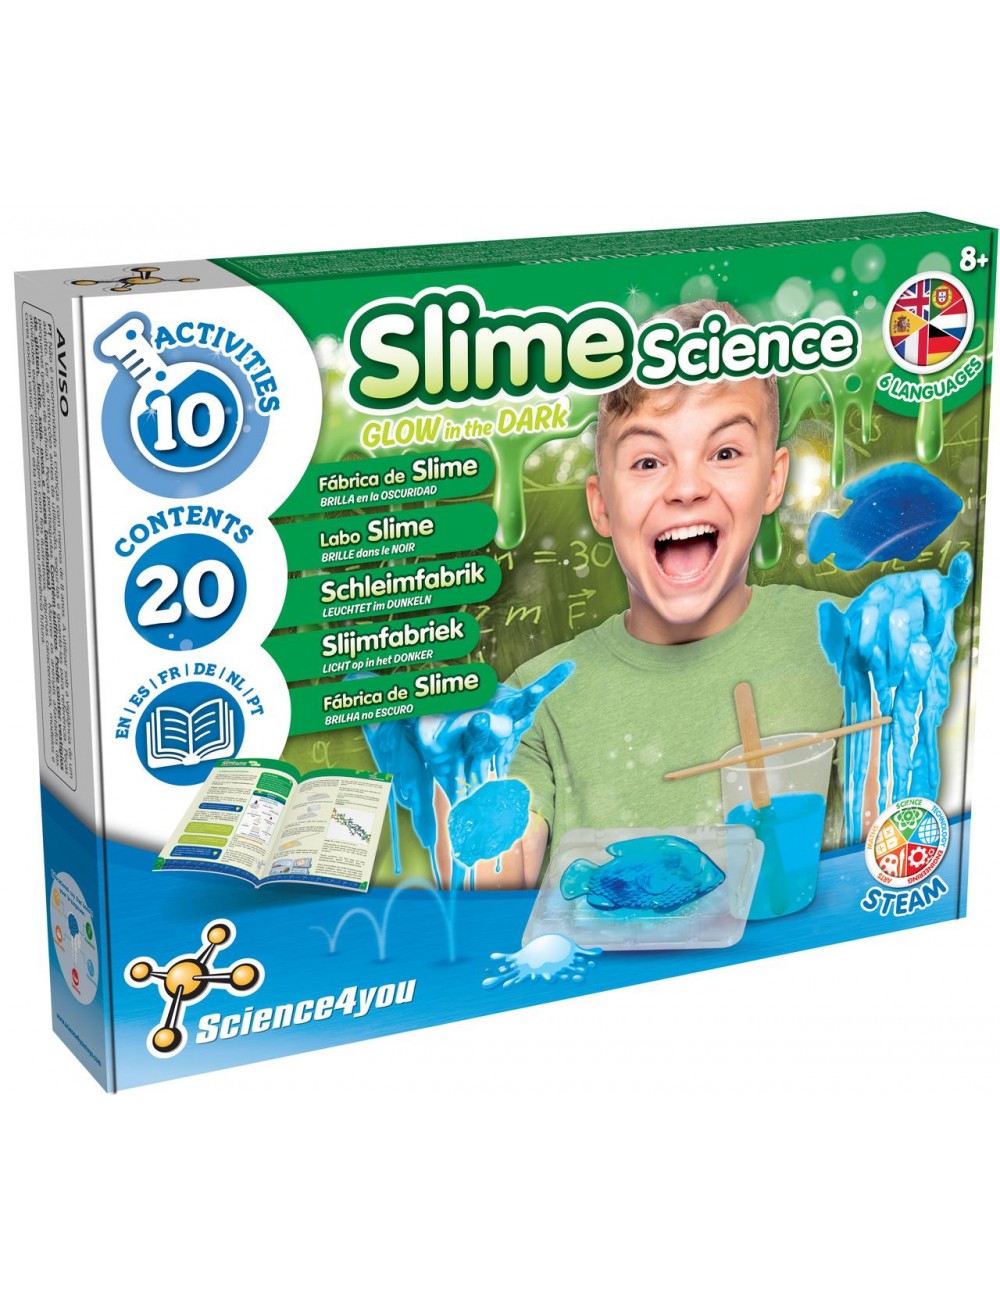 Slime Science GID - Multi-language, Science Toys for Children Aged 8+